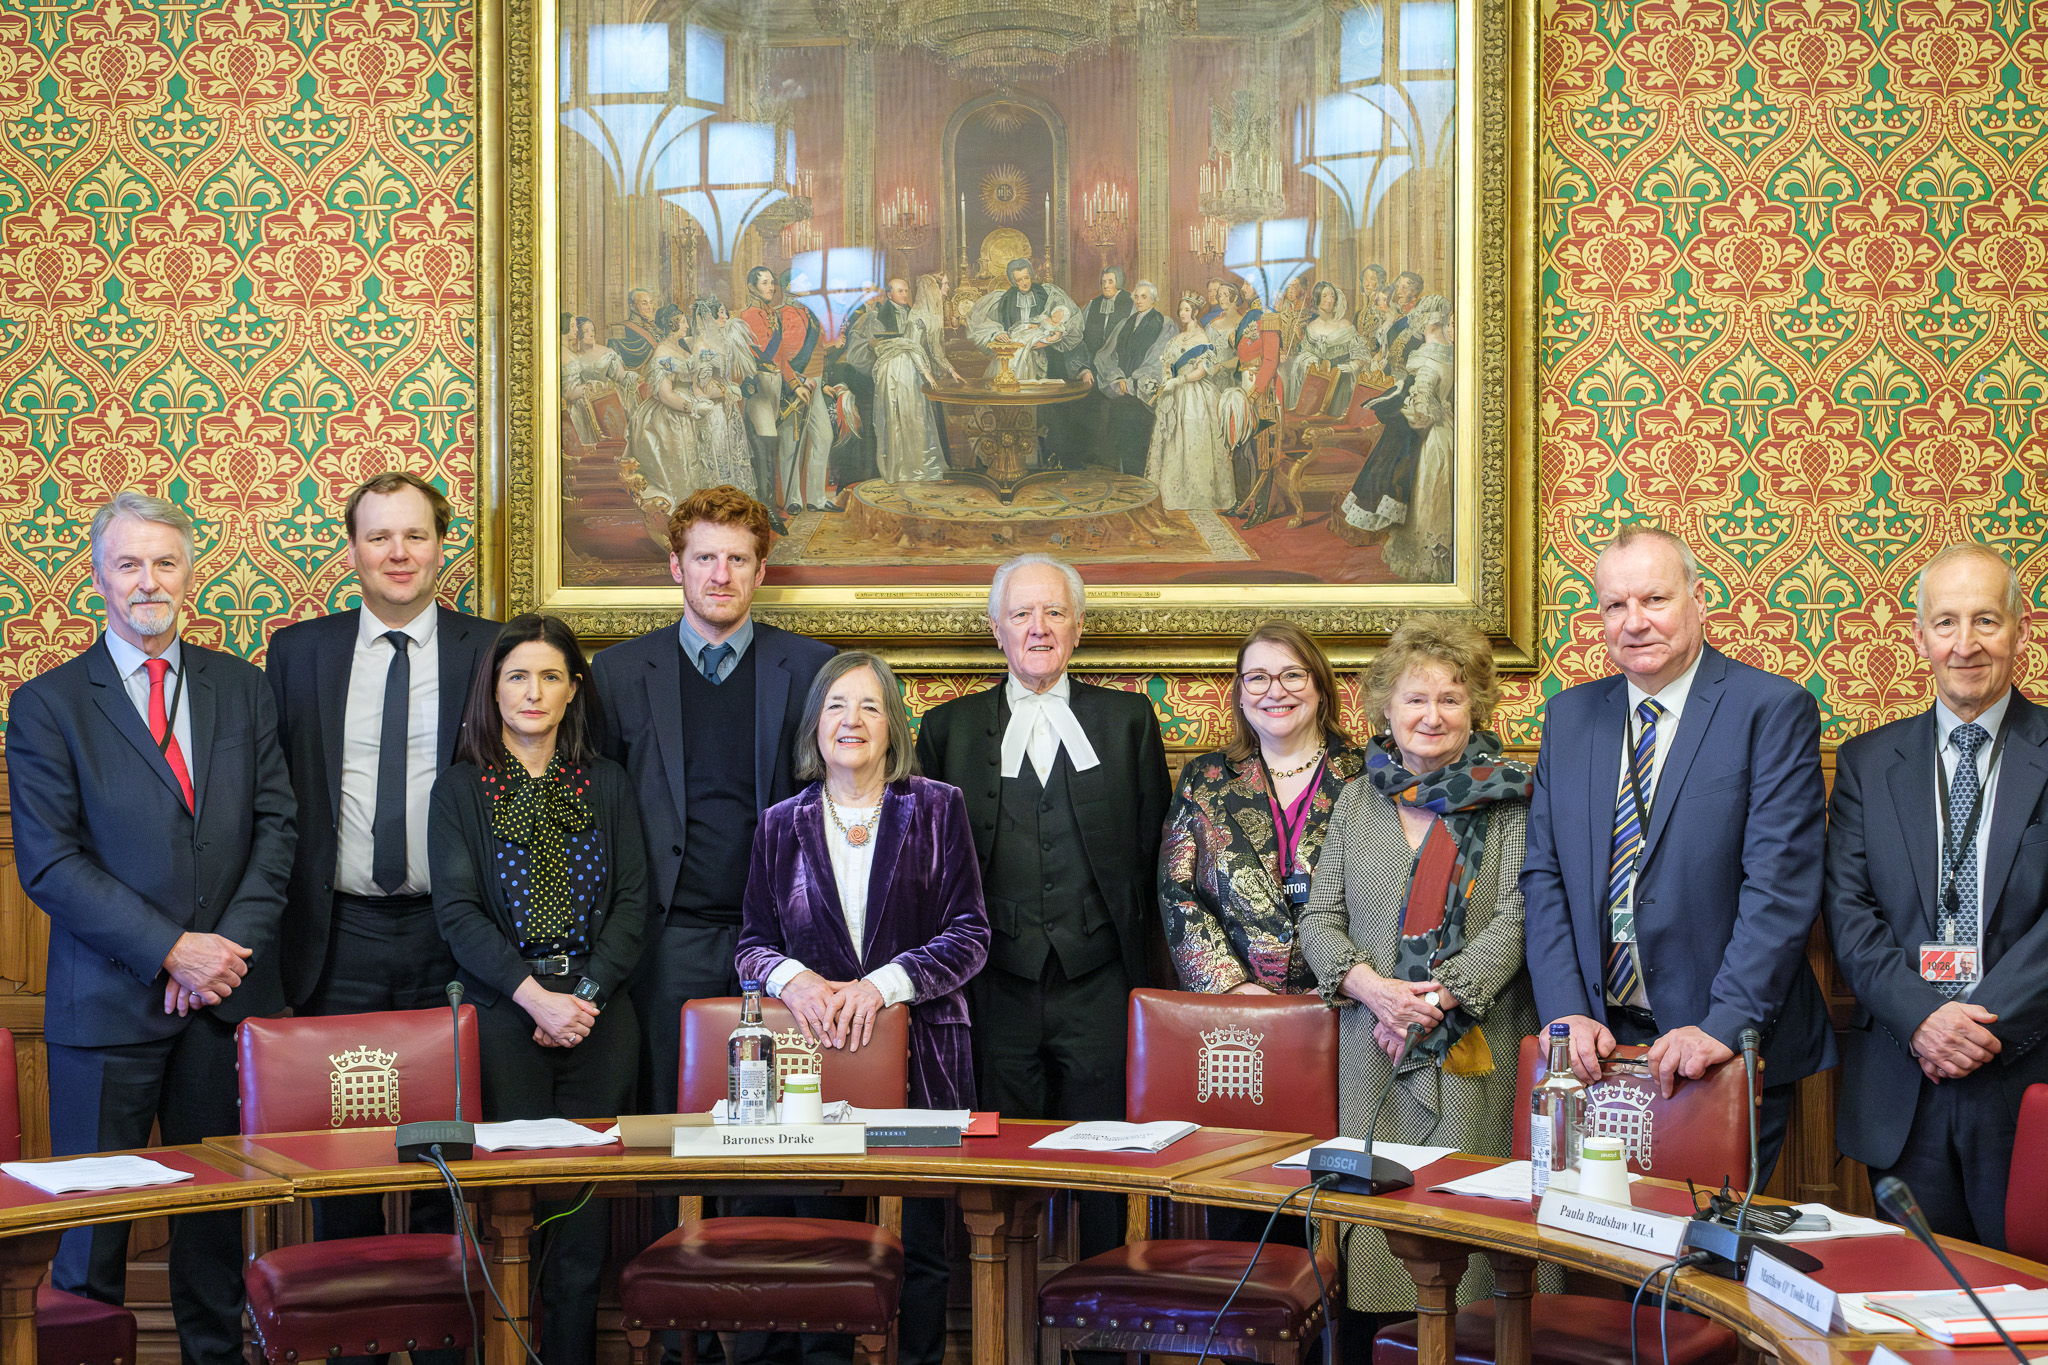 The meeting of the Inter-parliamentary Forum (IPF) at the House of Lords on 29 February